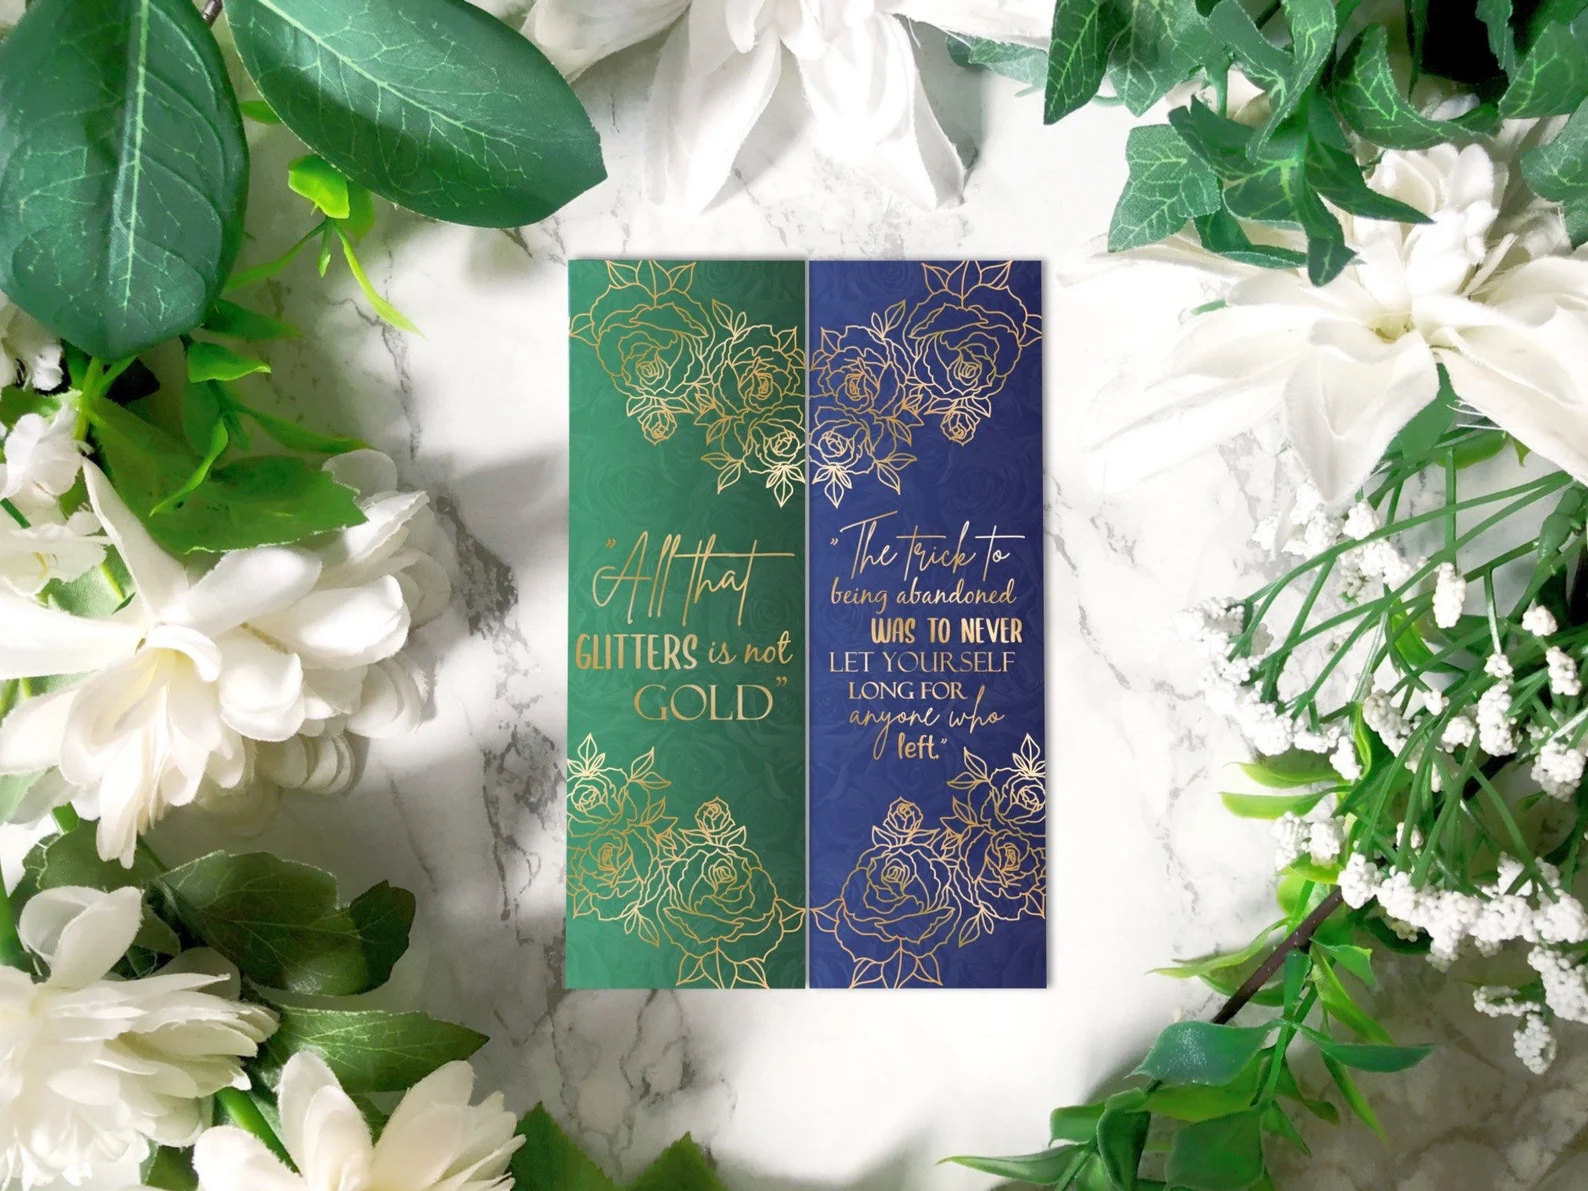 Two bookmarks, one green and one blue, with gold lead designs that showcase quotes from the books.